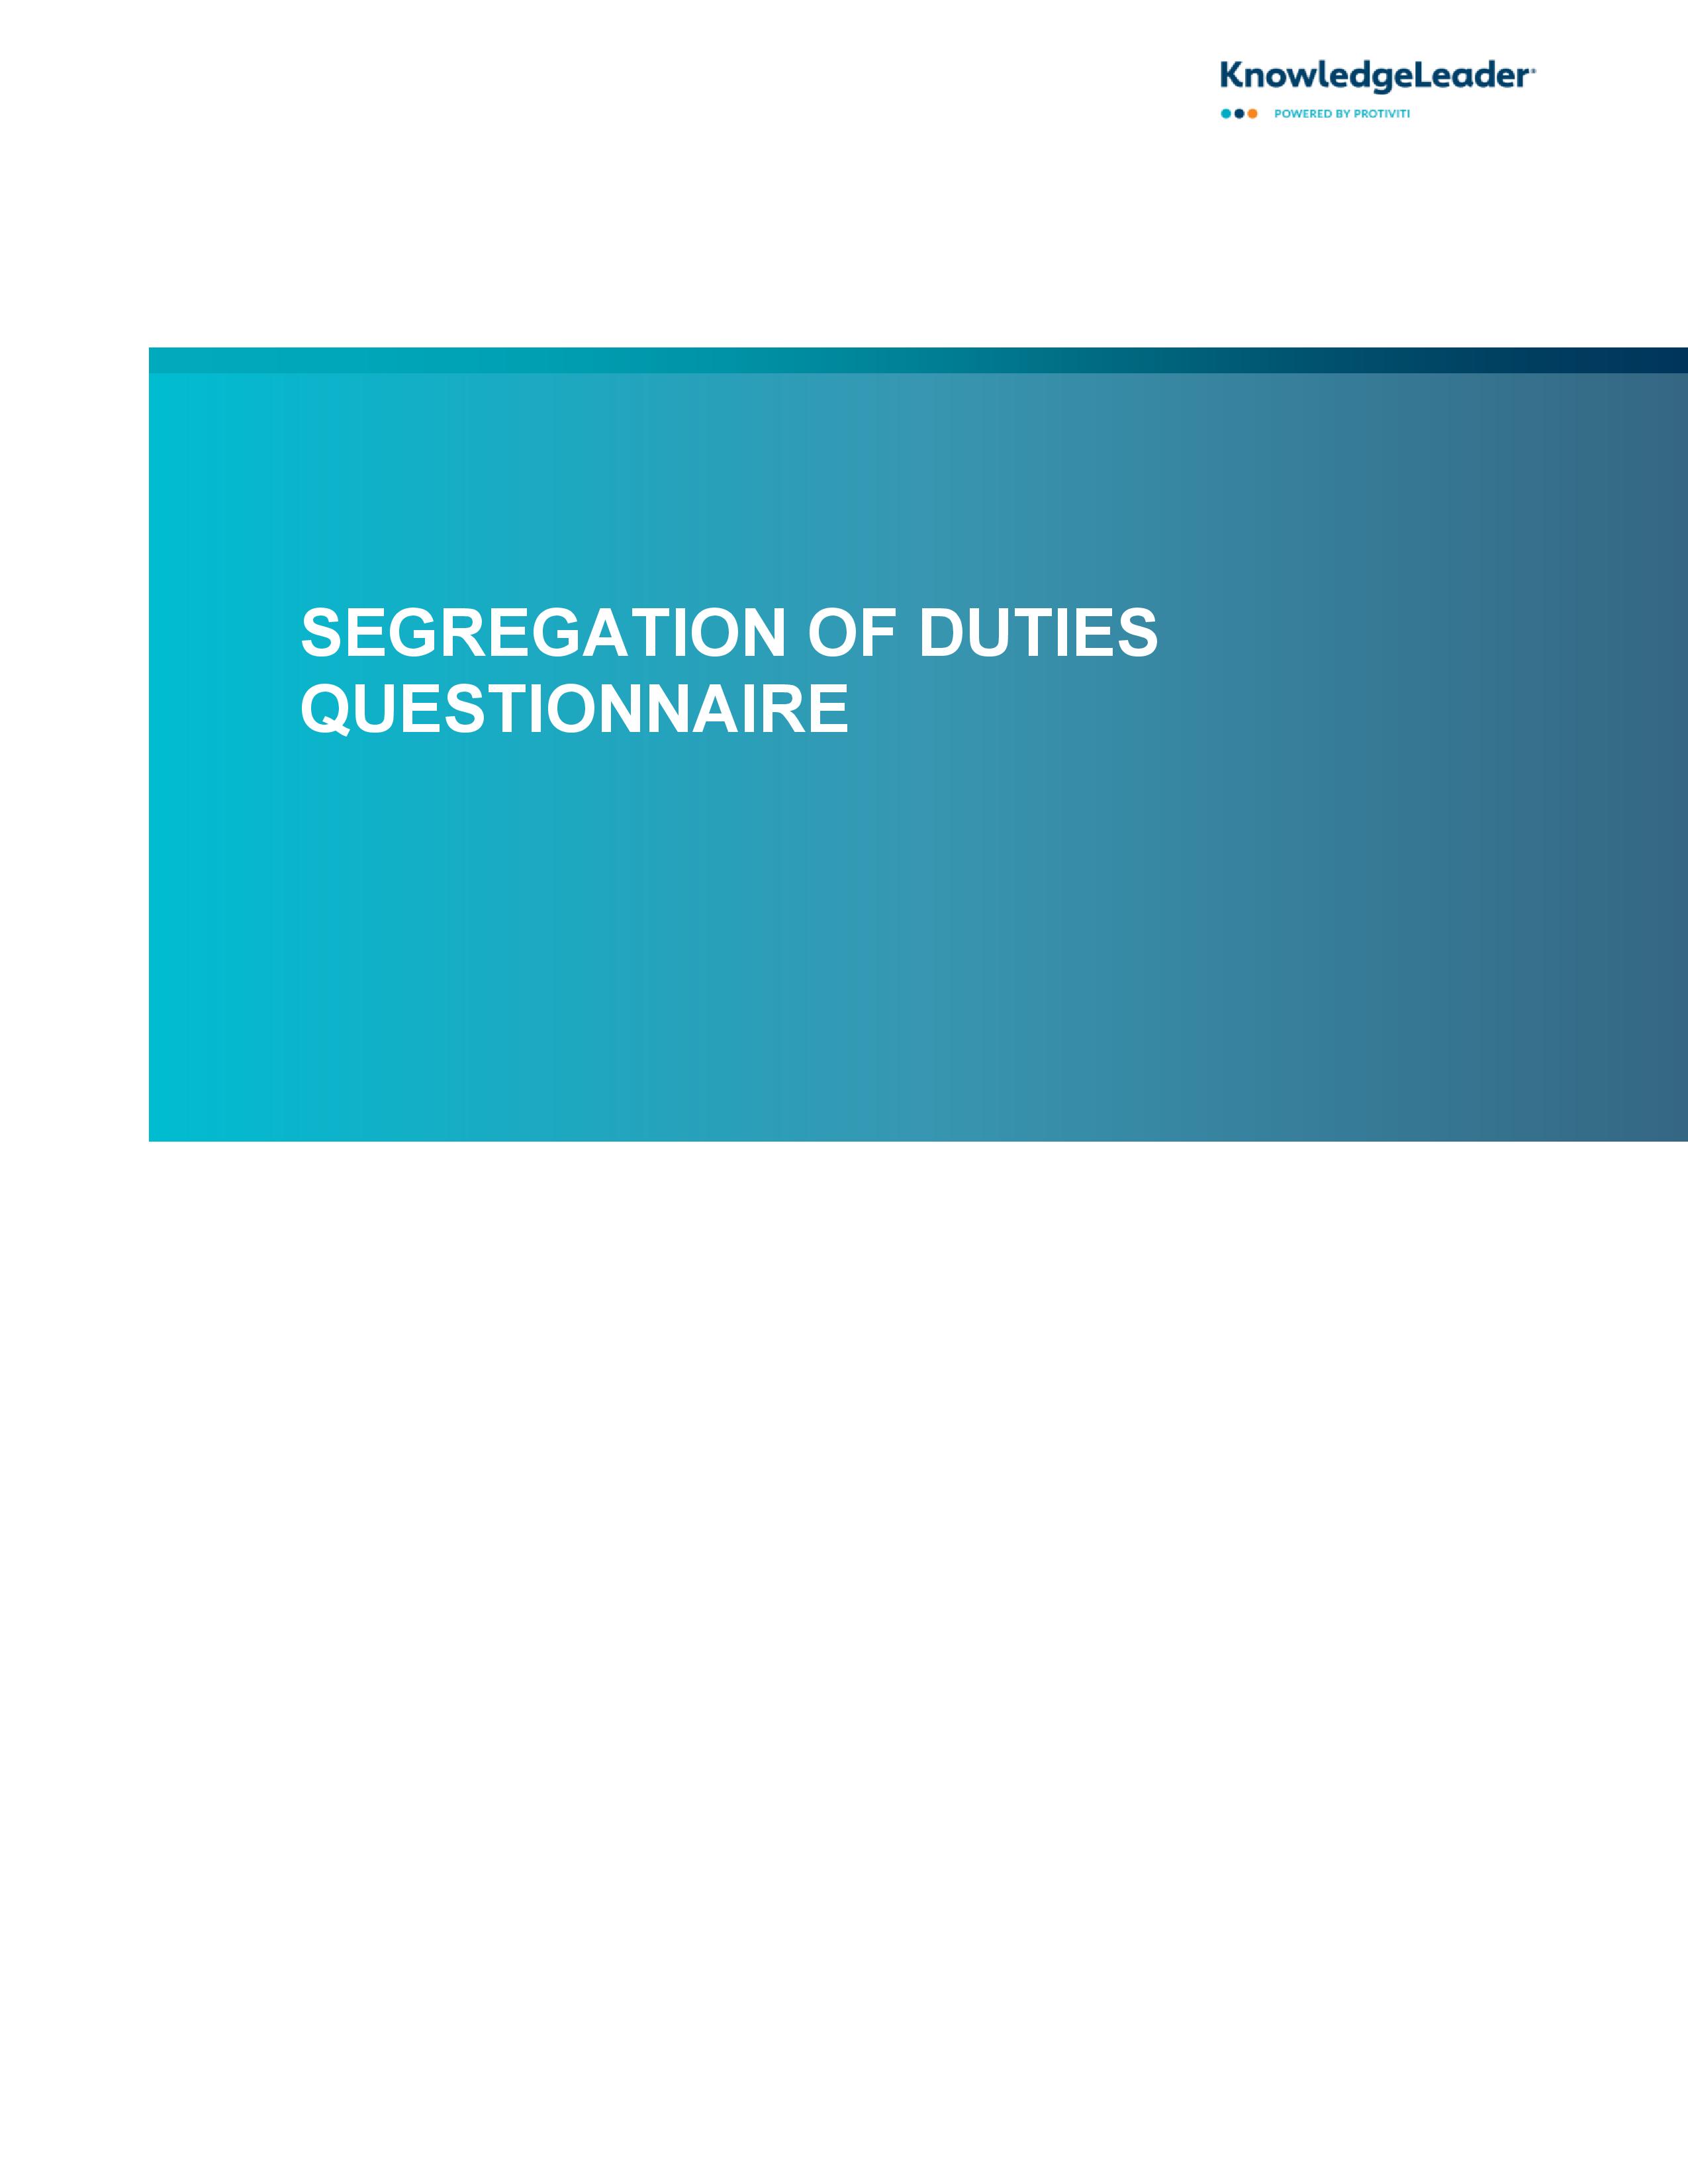 screenshot of the first page of the Segregation Of Duties Questionnaire